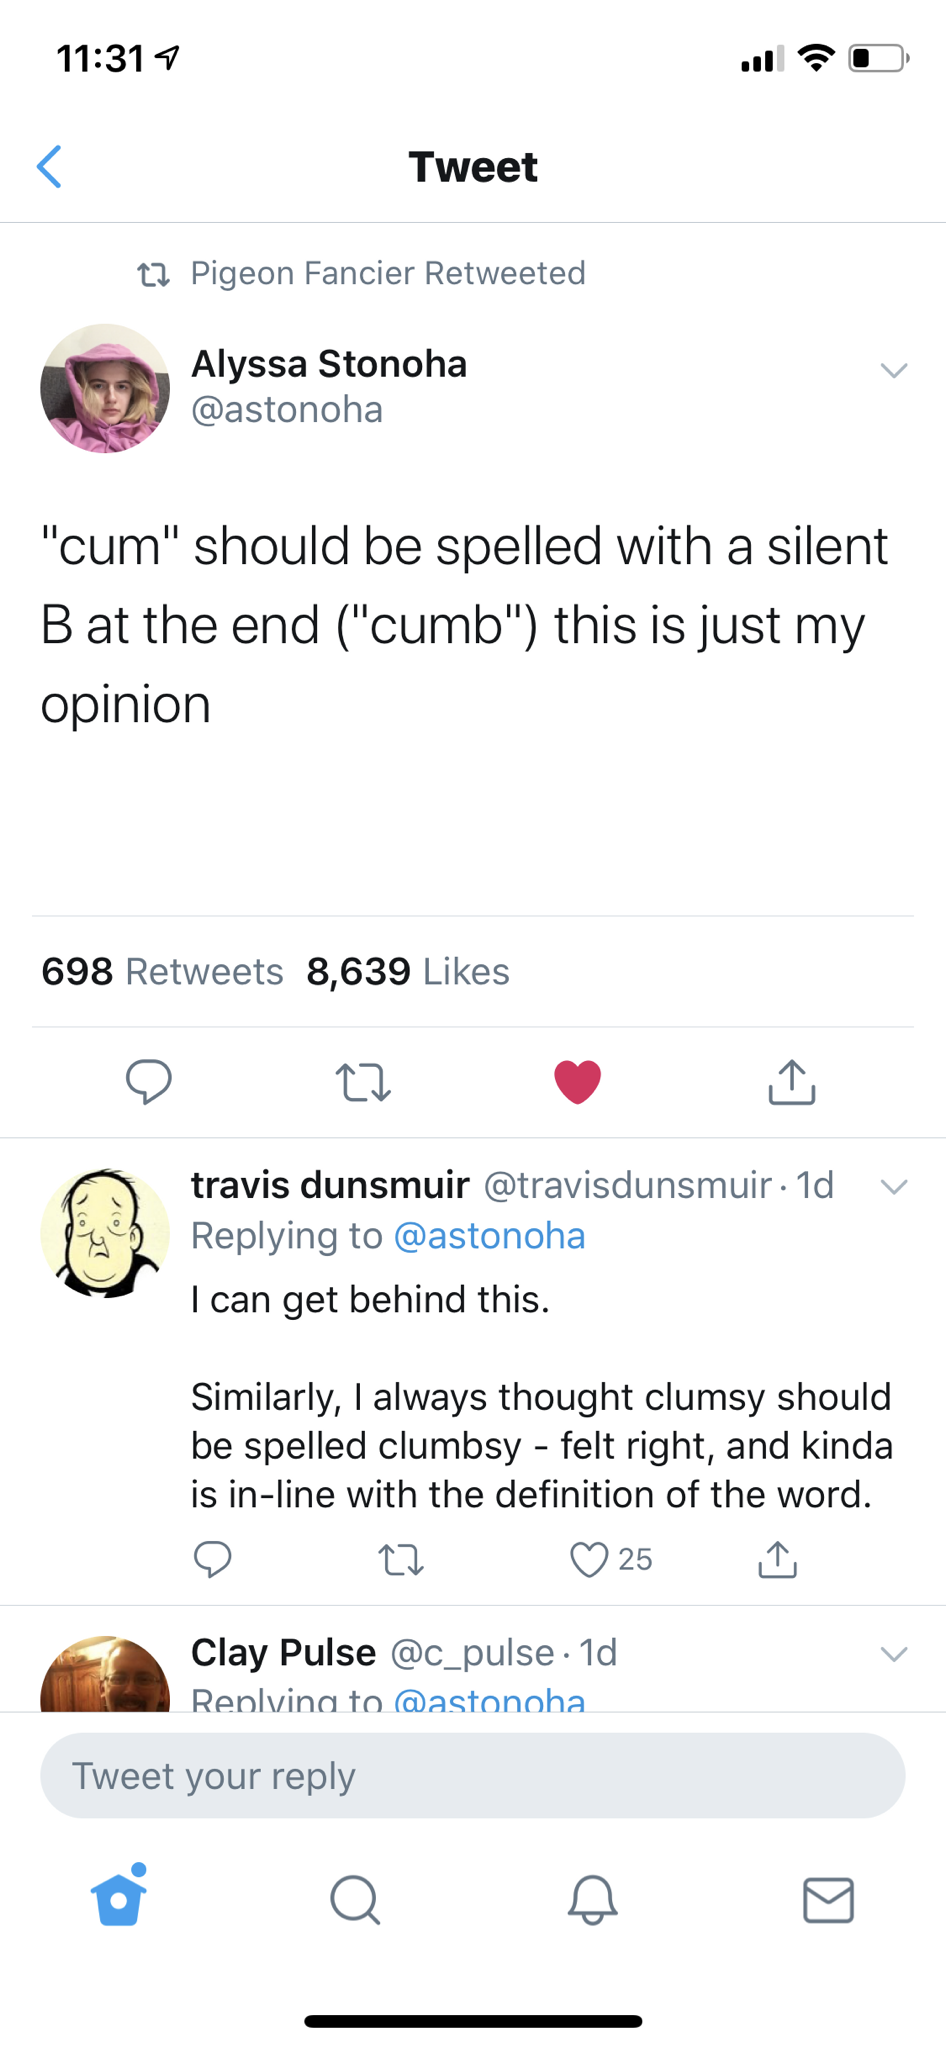 screenshot - Tweet Pigeon Fancier Retweeted 2 Alyssa Stonoha astonoha "cum" should be spelled with a silent B at the end "cumb" this is just my opinion 698 8,639 travis dunsmuir astonoha I can get behind this Similarly, I always thought clumsy should be s